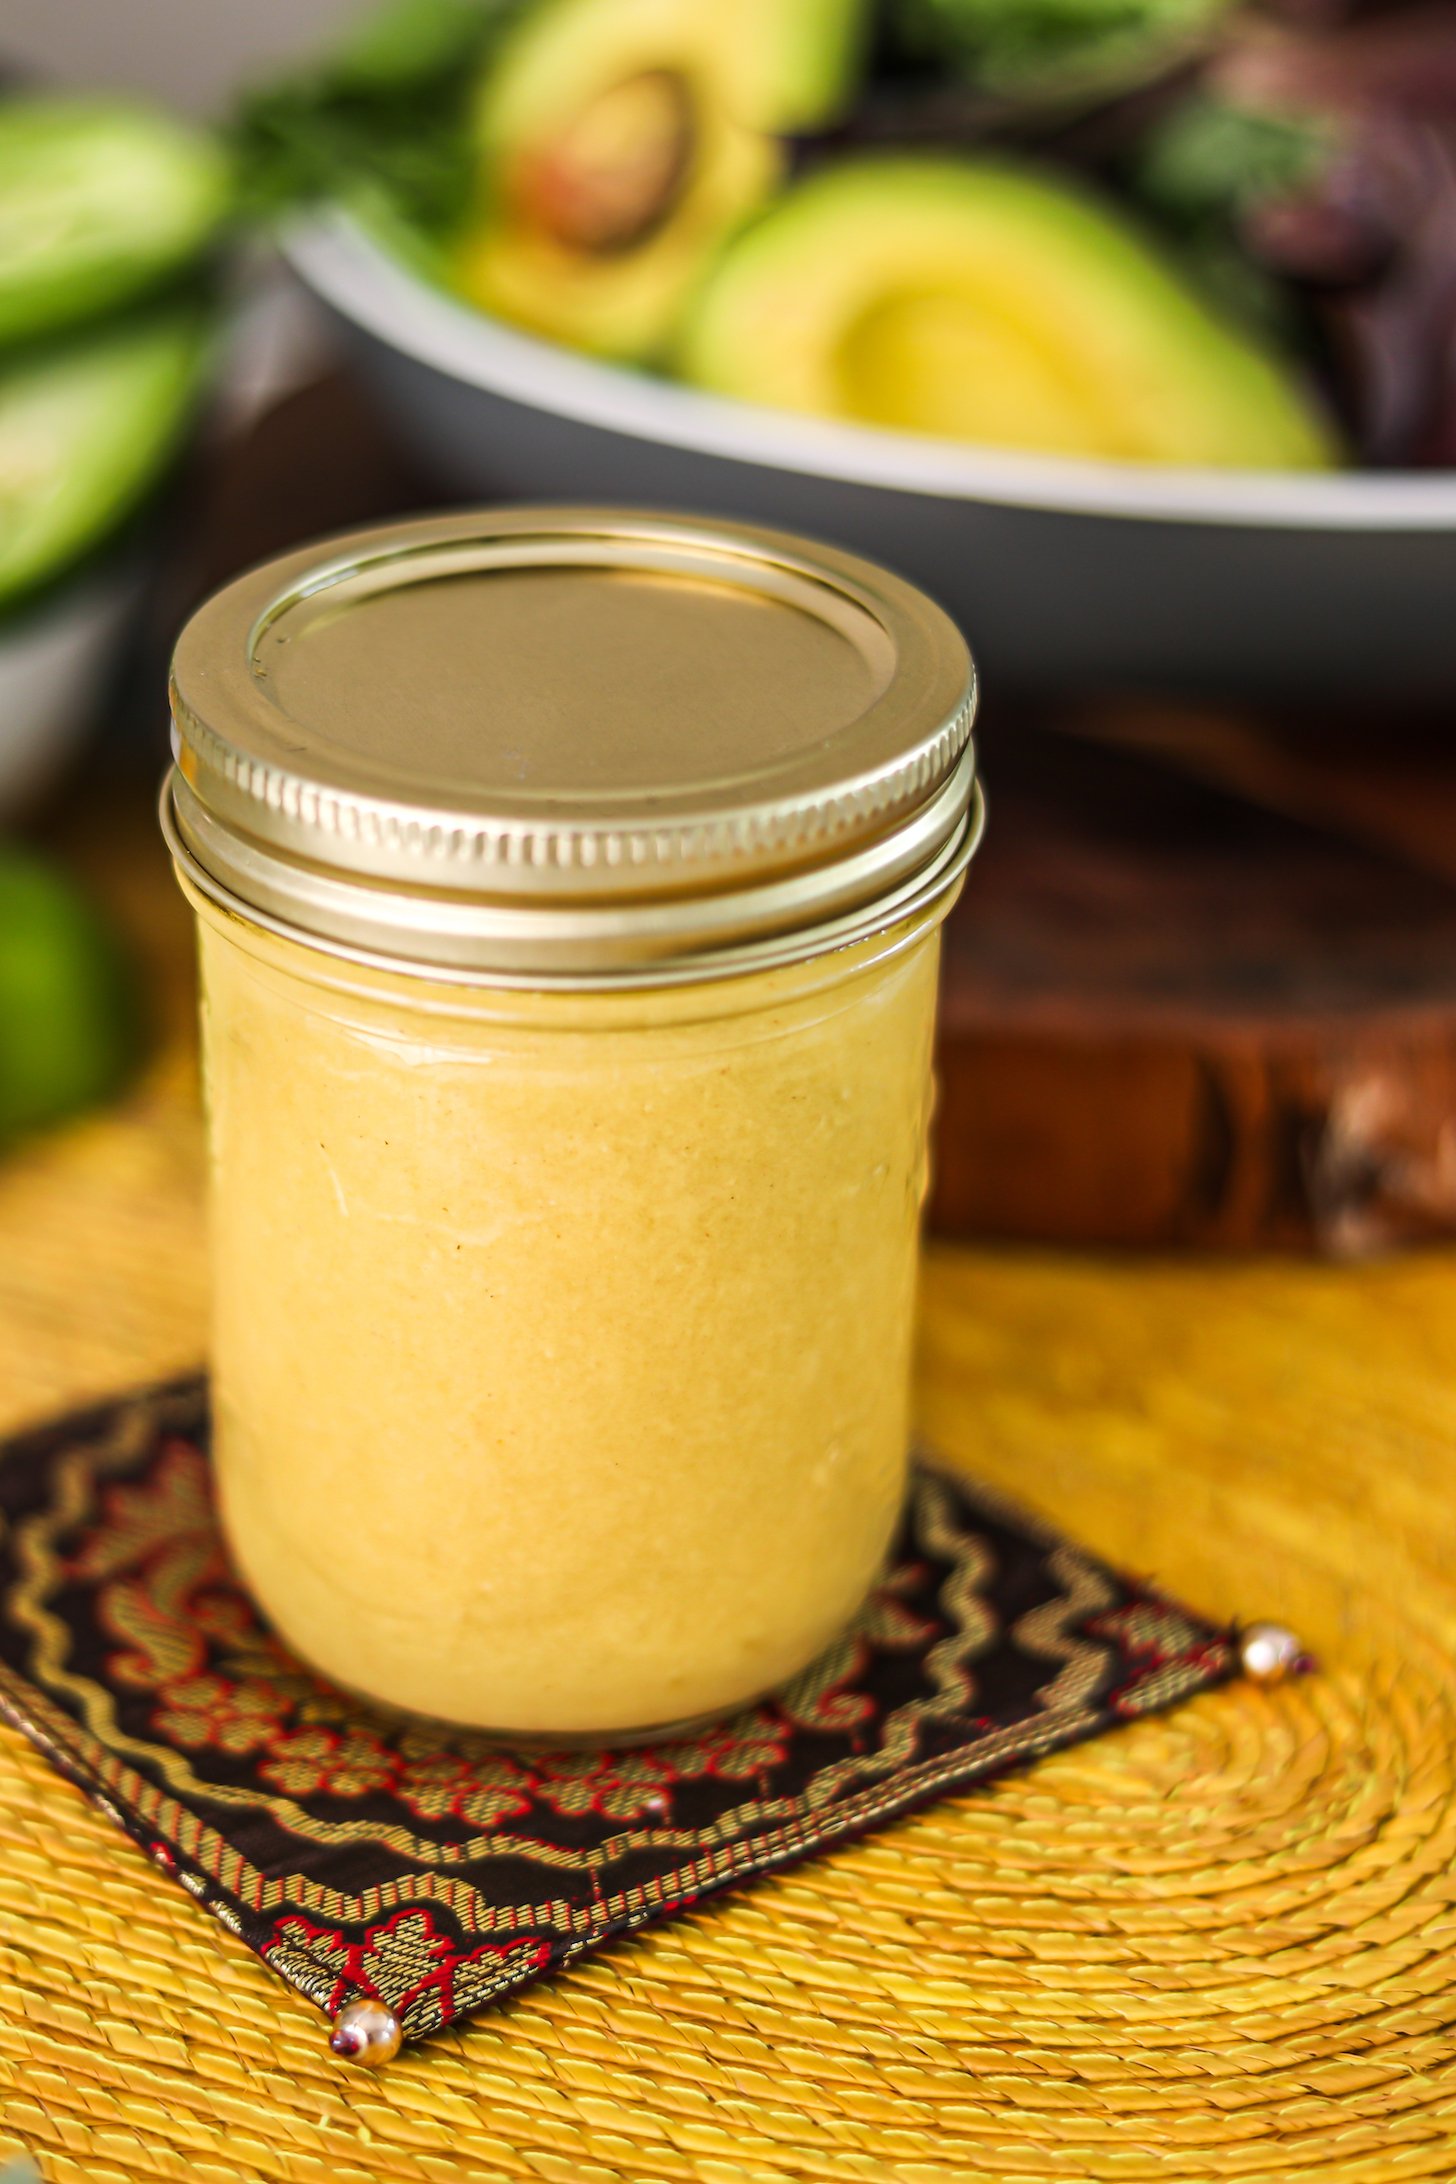 Perspective image of a mason jar of honey mustard dressing on a decorative mat with avocados in the bacground.